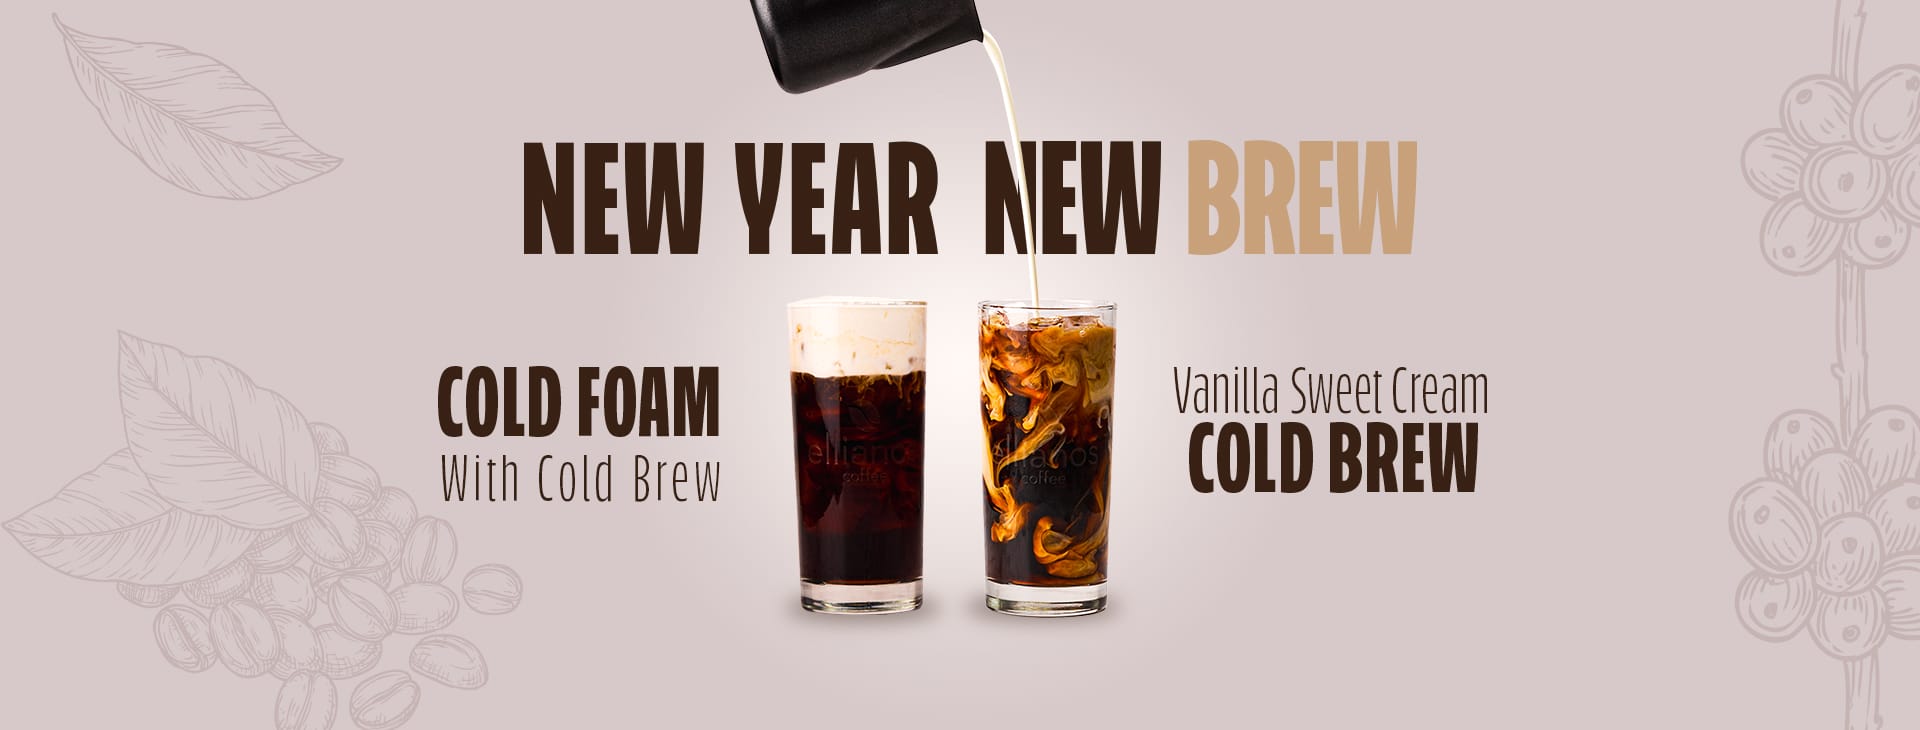 Ellianos Coffee Introduces New Year New Brew Promotion with Two Menu Additions